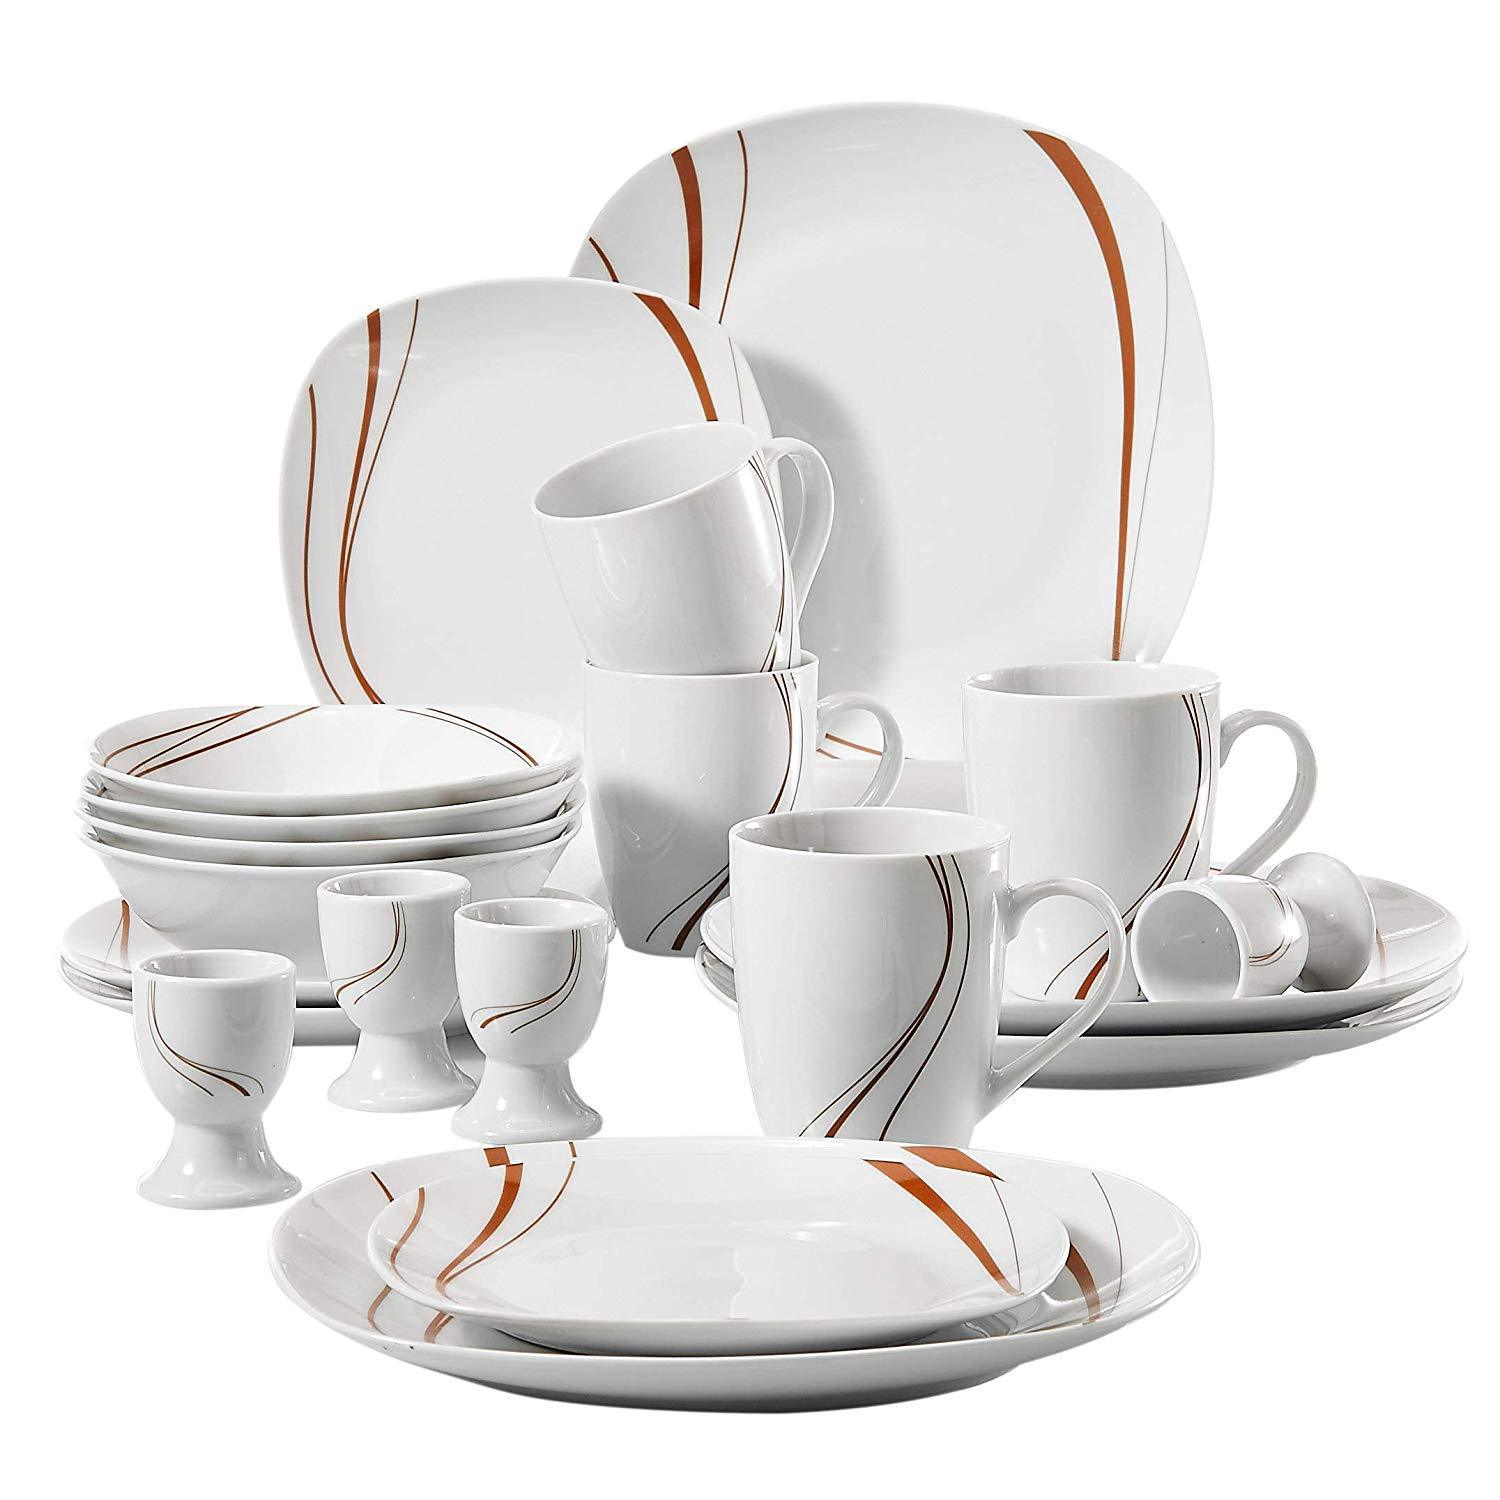 BONNIE 20-Piece Ivory White Tableware Porcelain Cutlery Dinner Set with 4*Egg Cup,Mug,Dessert Plate,Bowl,Dinner Plate - Nordic Side - 20, BONNIE, CupMugDessert, Cutlery, Dinner, Egg, Ivory, P